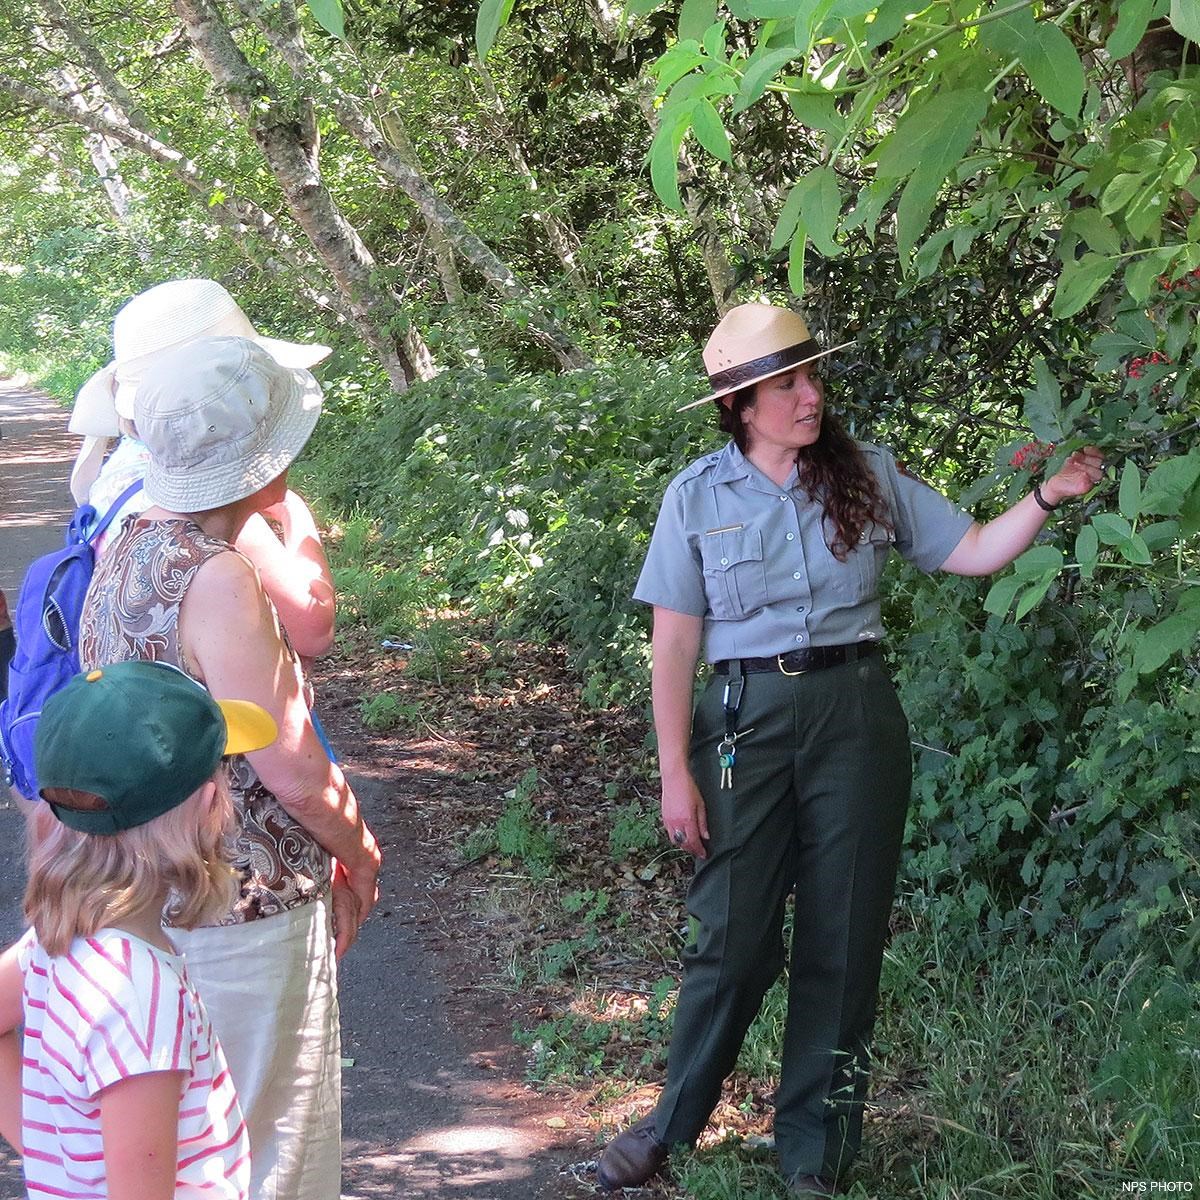 A park ranger point to some red elderberries while talking to visitors.